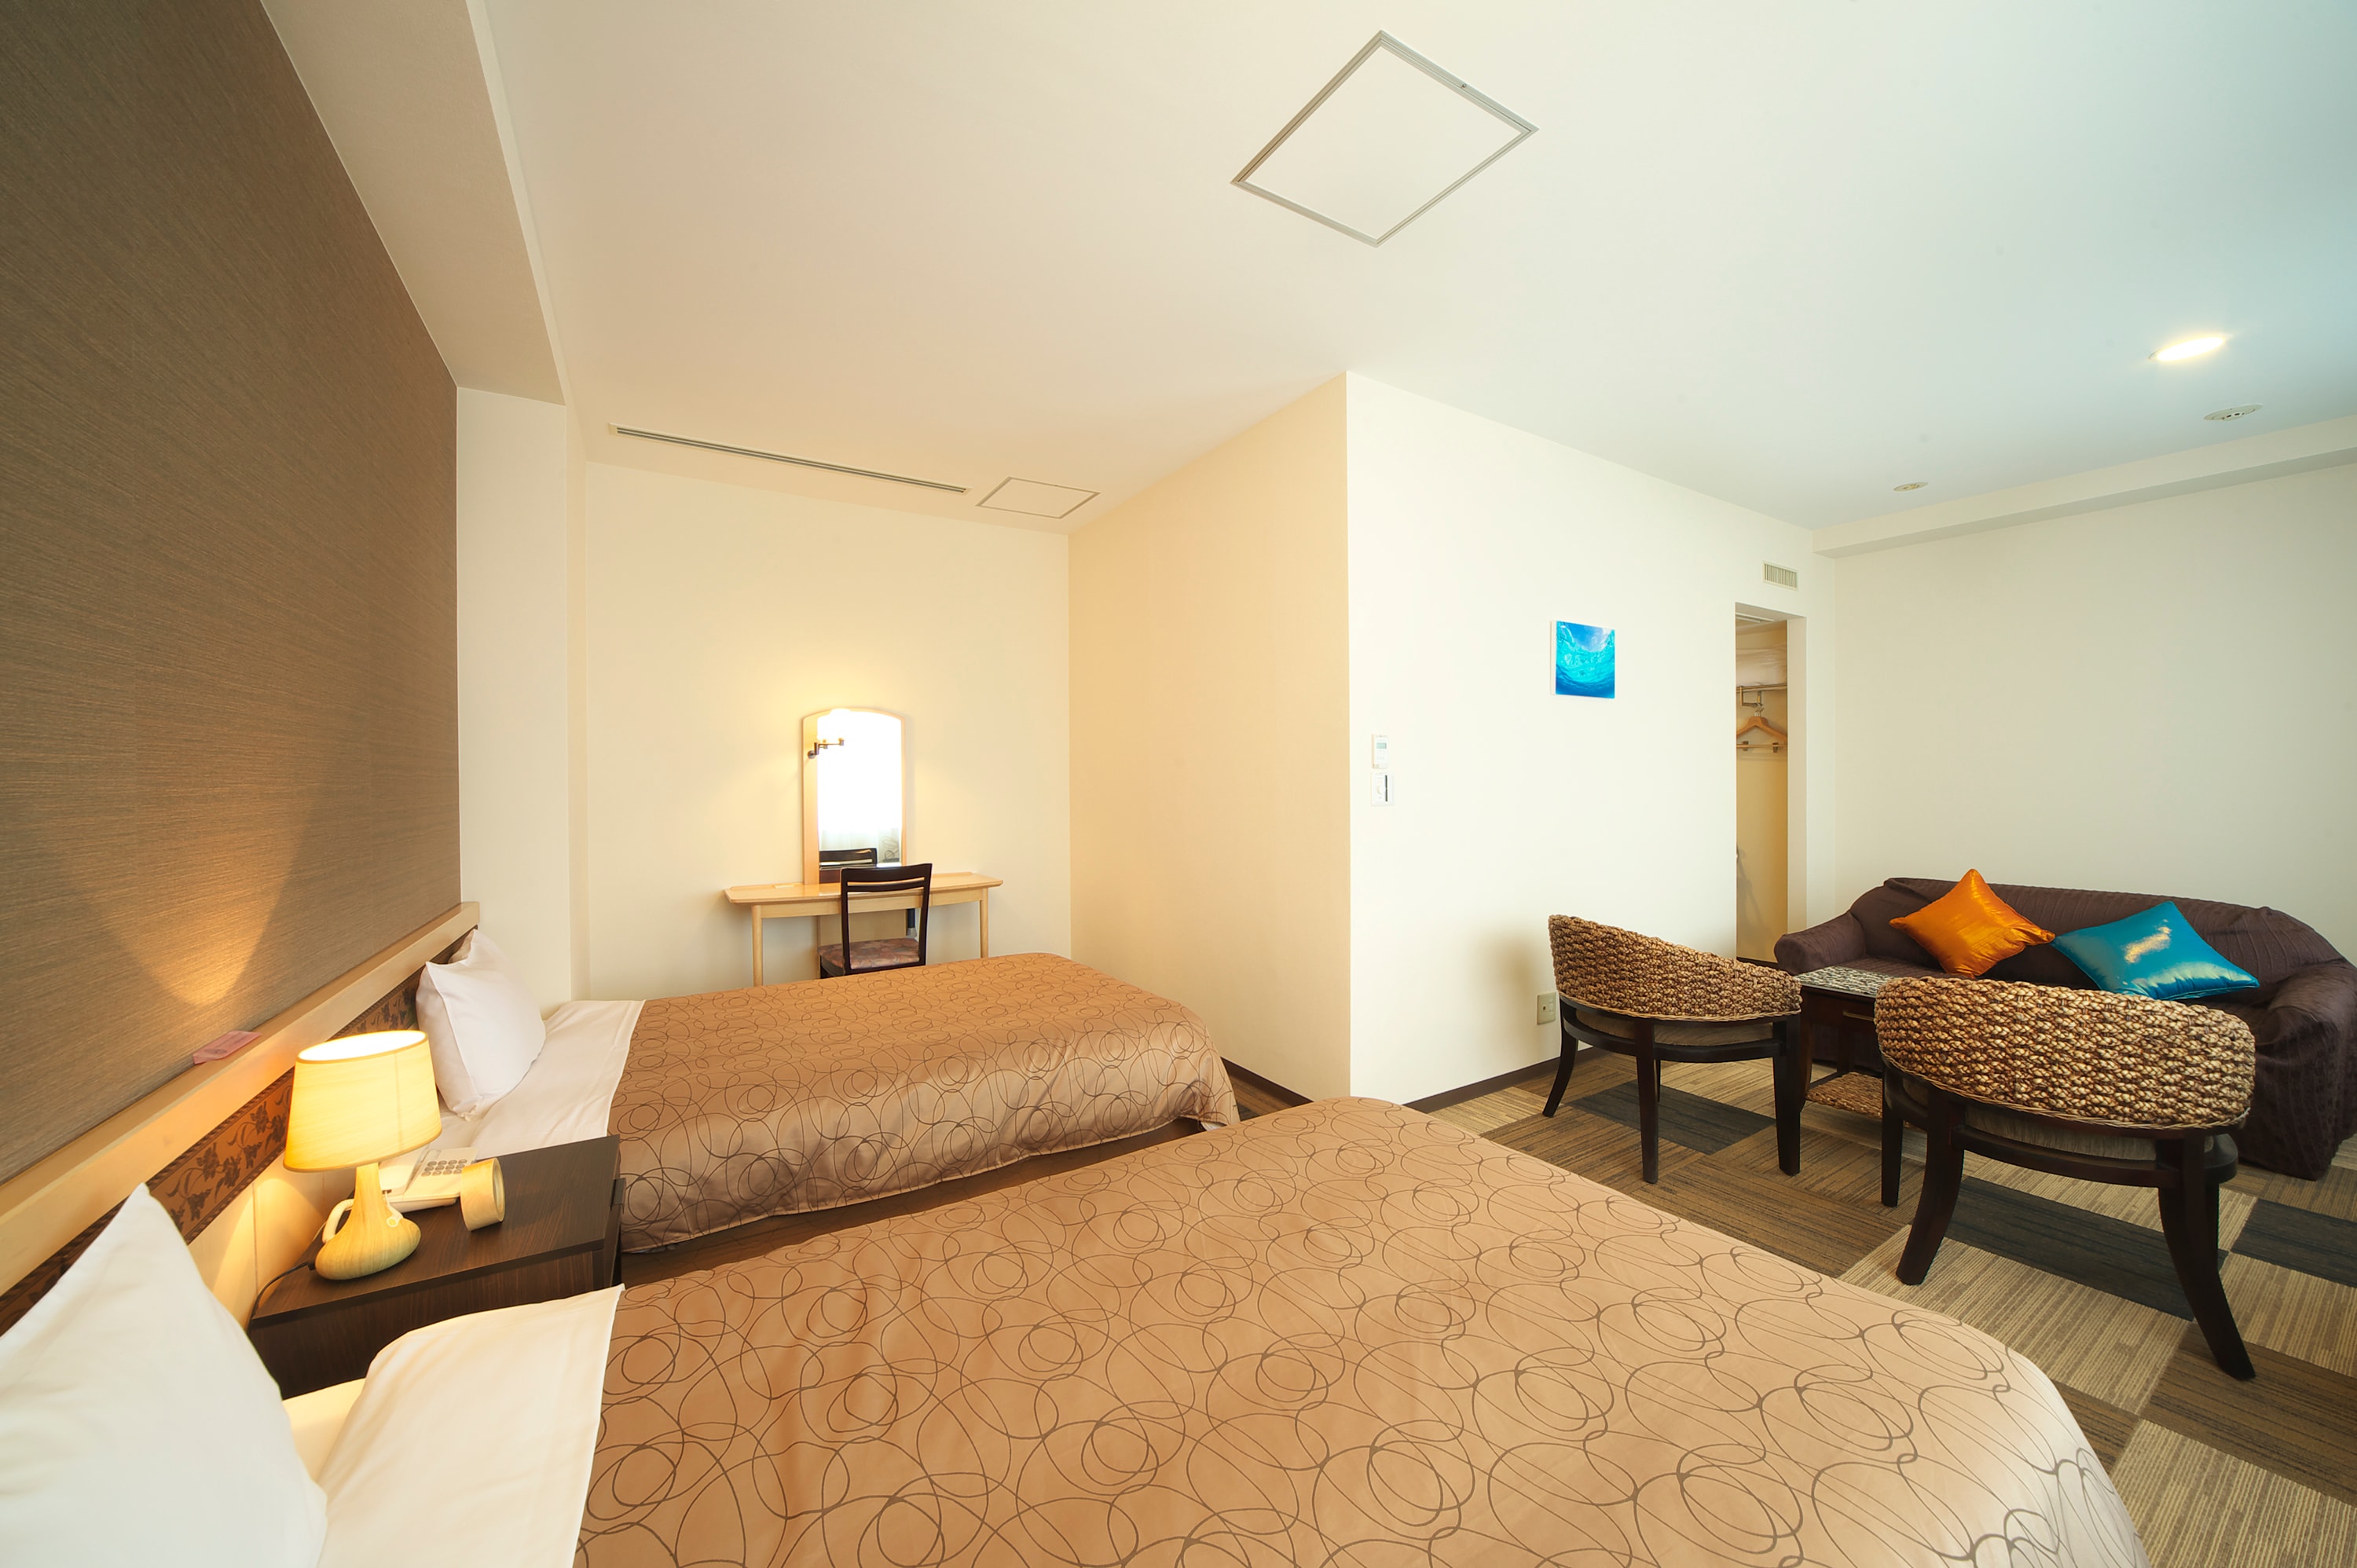 Deluxe twin room * The photo is an example